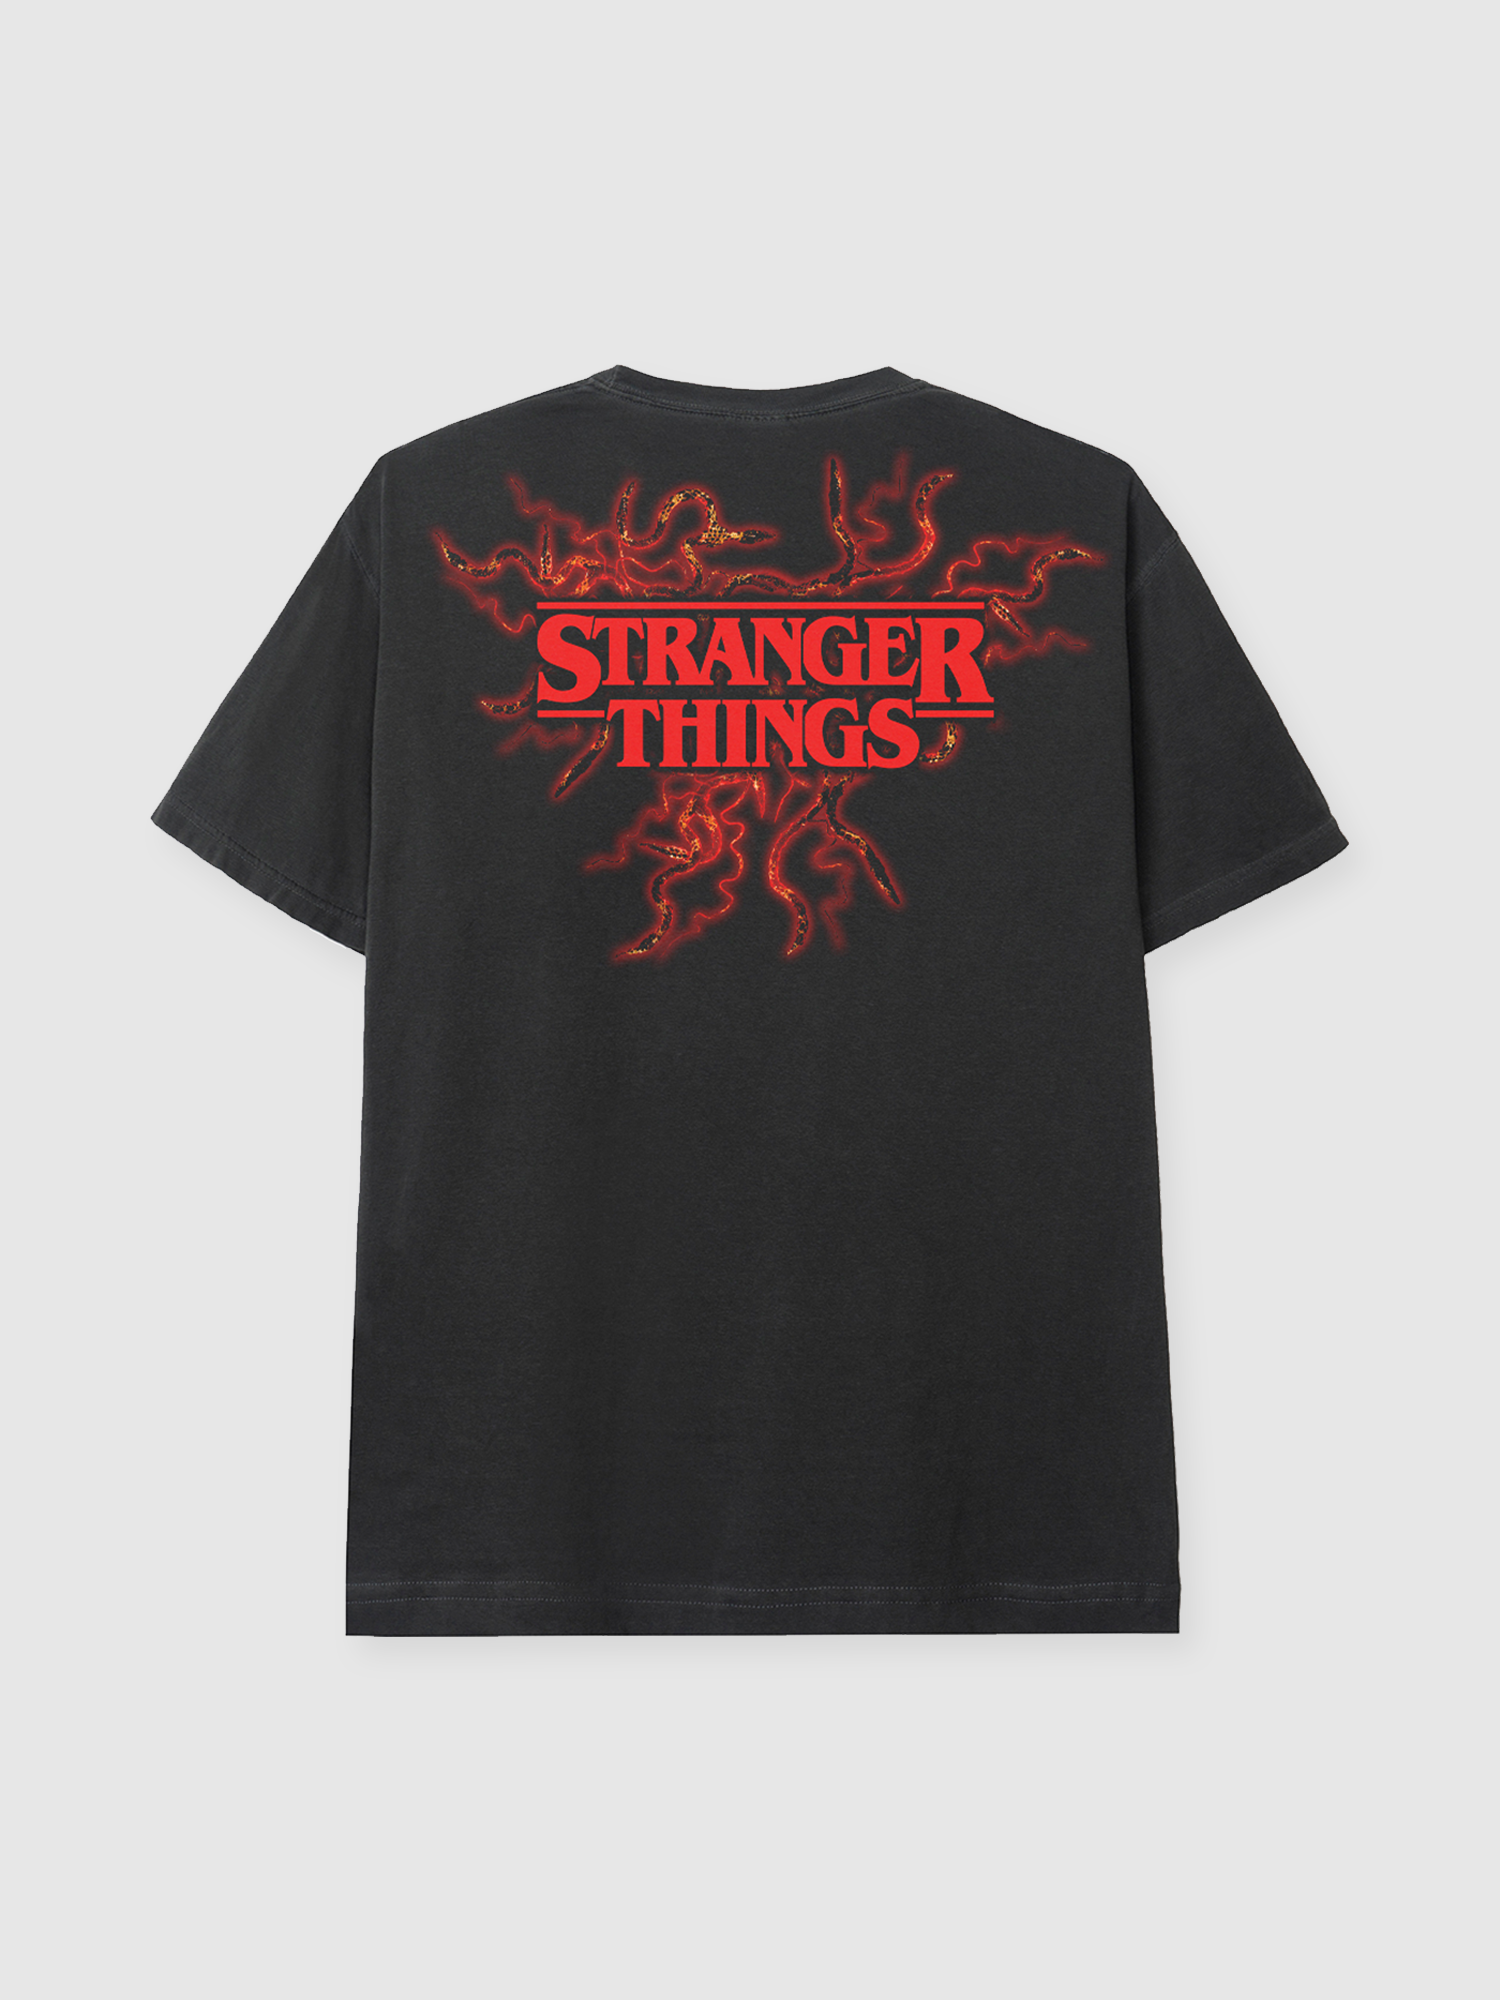 Stranger Things Eleven Jersey Photographic Print for Sale by